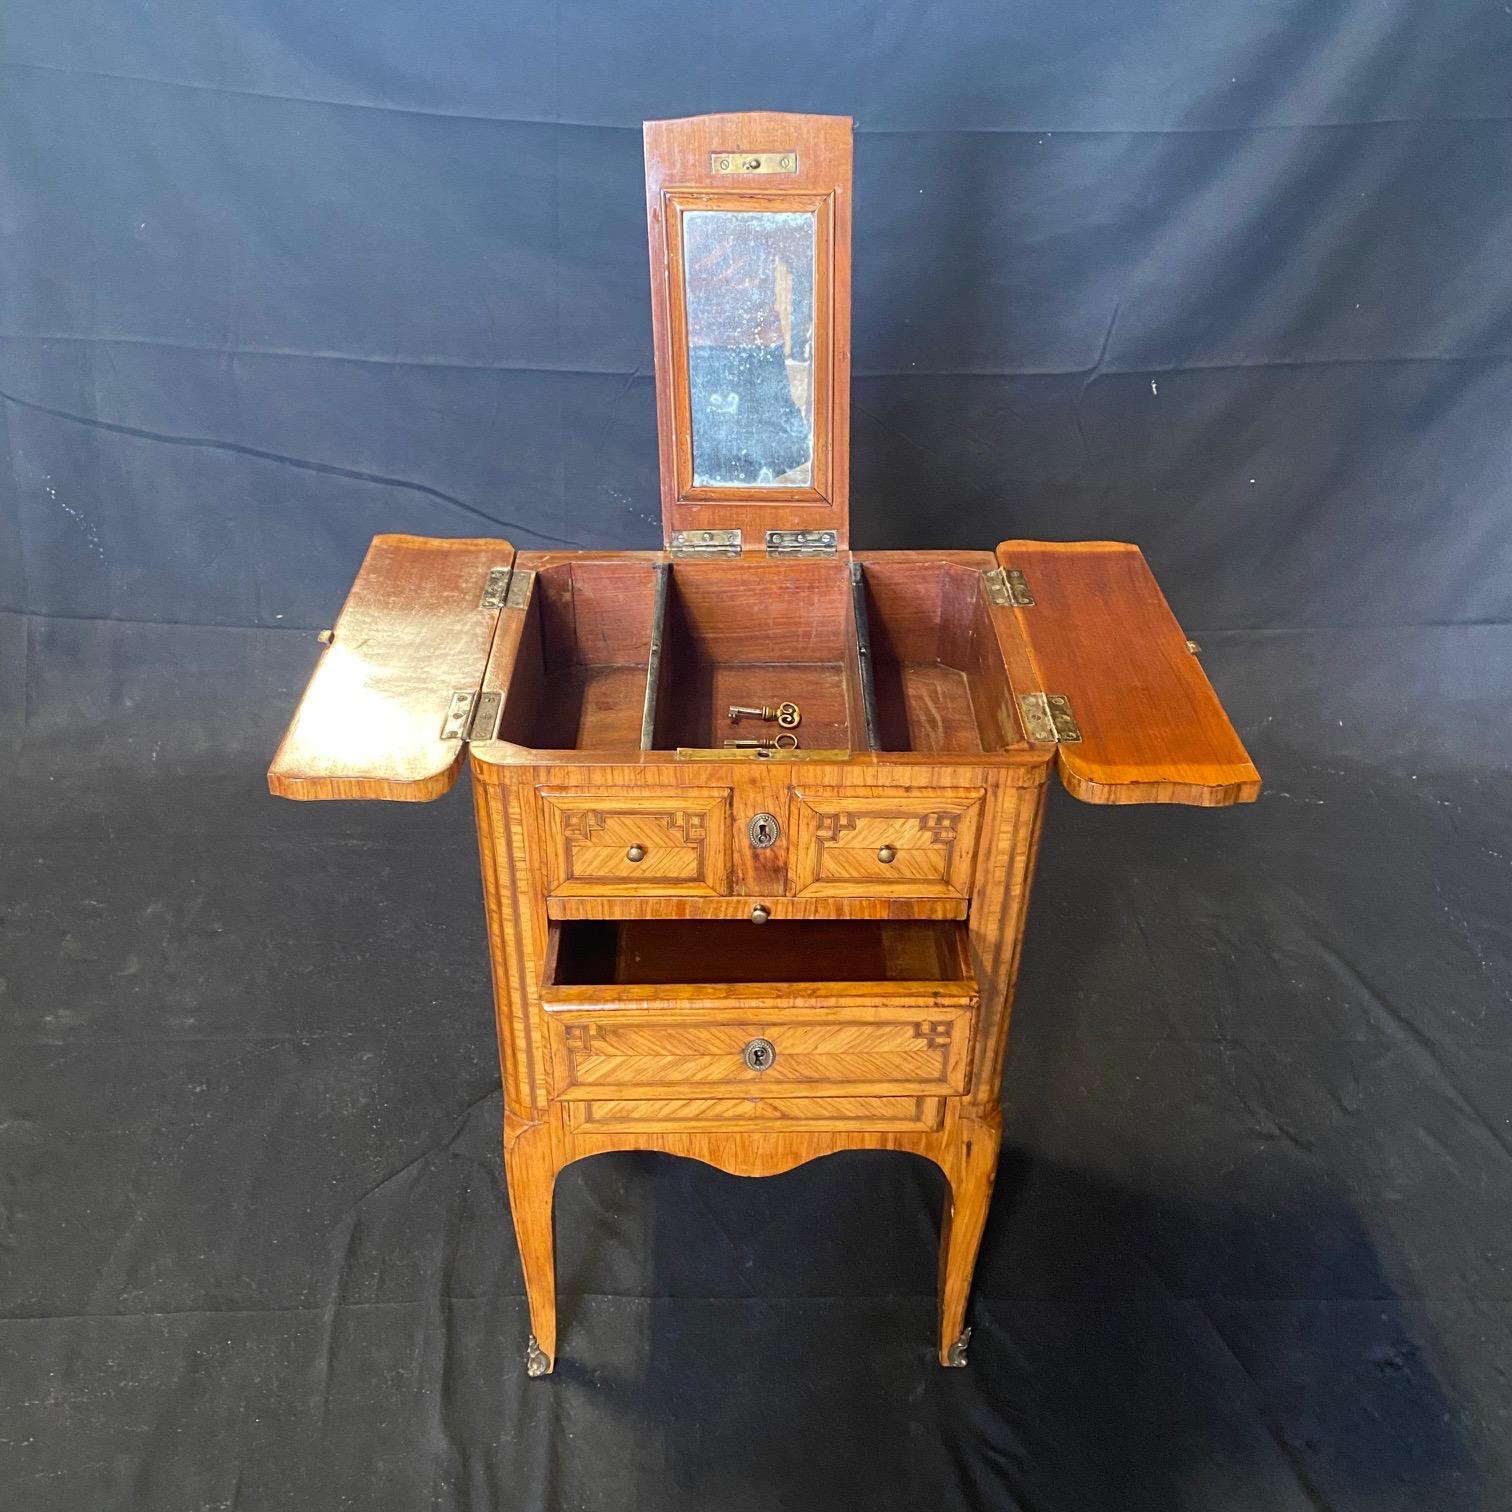 Lovely unusual early French 18th Century Inlaid Petite Commode, Side or Accent Table, Chest or Dressing Table with Mirror, Leather Leaf Extension and Drawers. Top opens to reveal a center mirror and two side leaves, with three interior compartments.